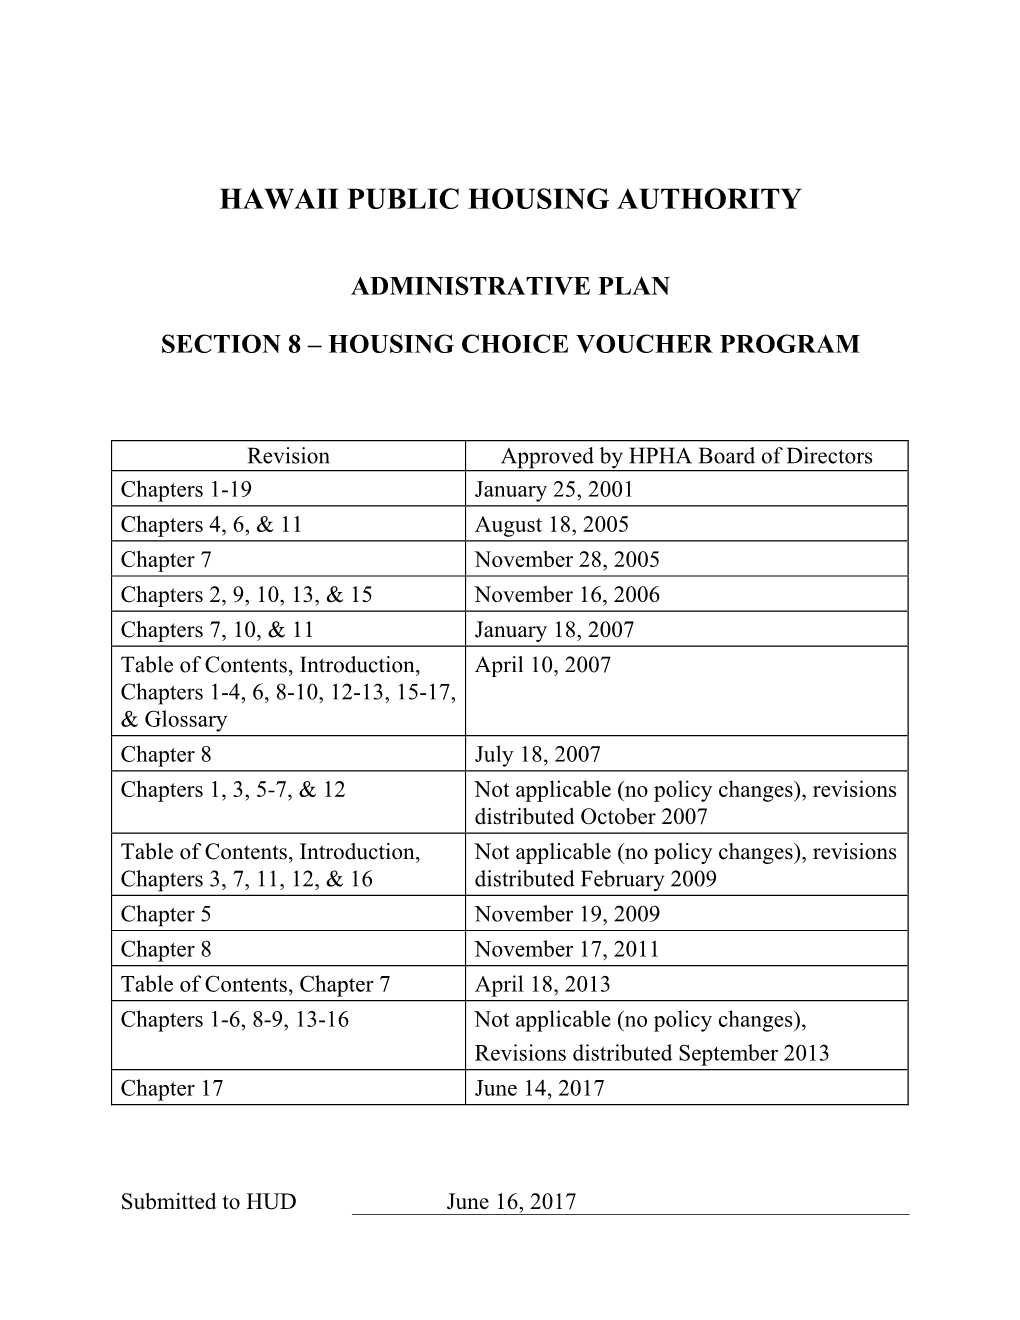 Section 8 Administrative Plan